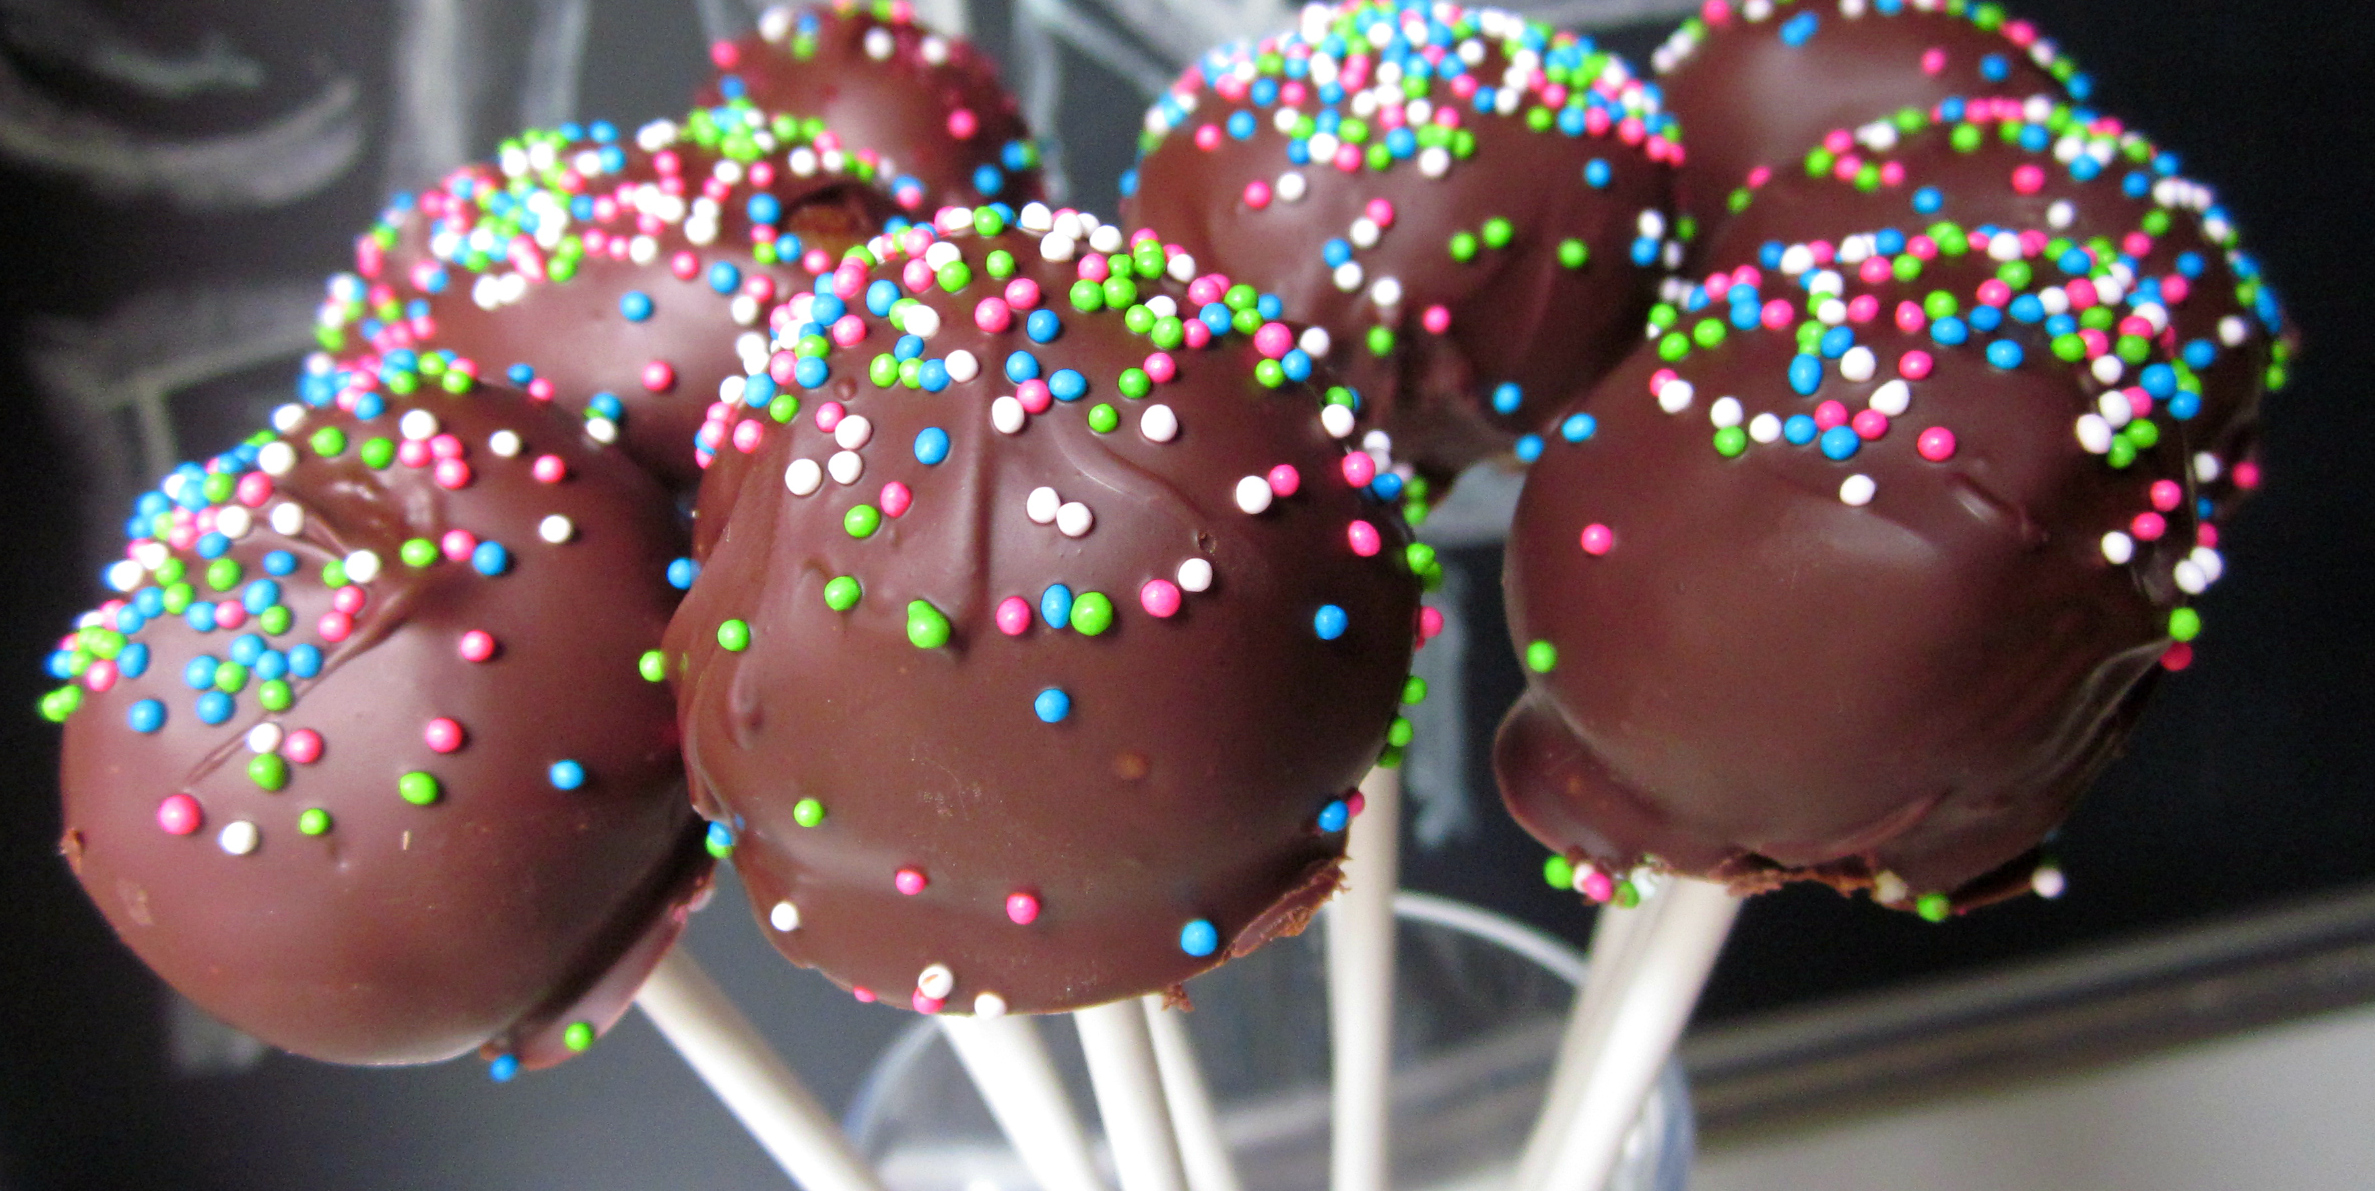 Doughnut pops, topped with candy